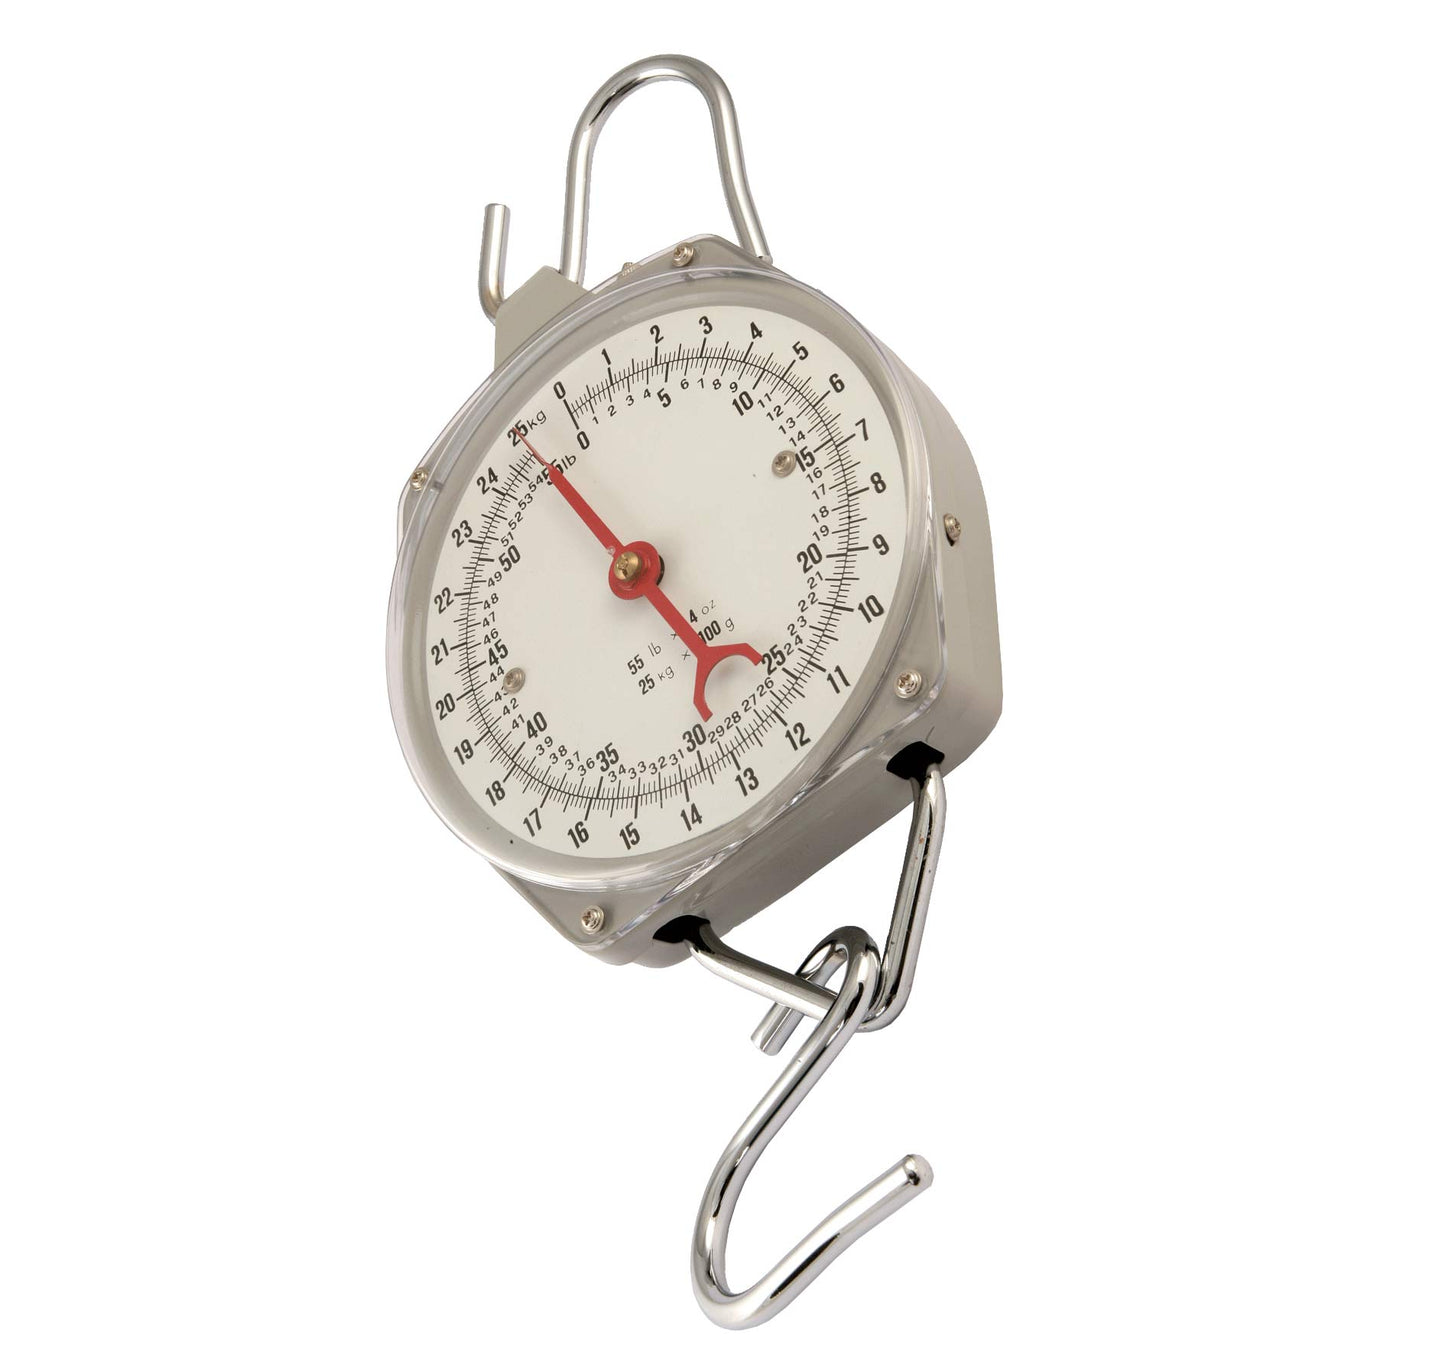 Agrihealth Weighing Scale - Hanging Type